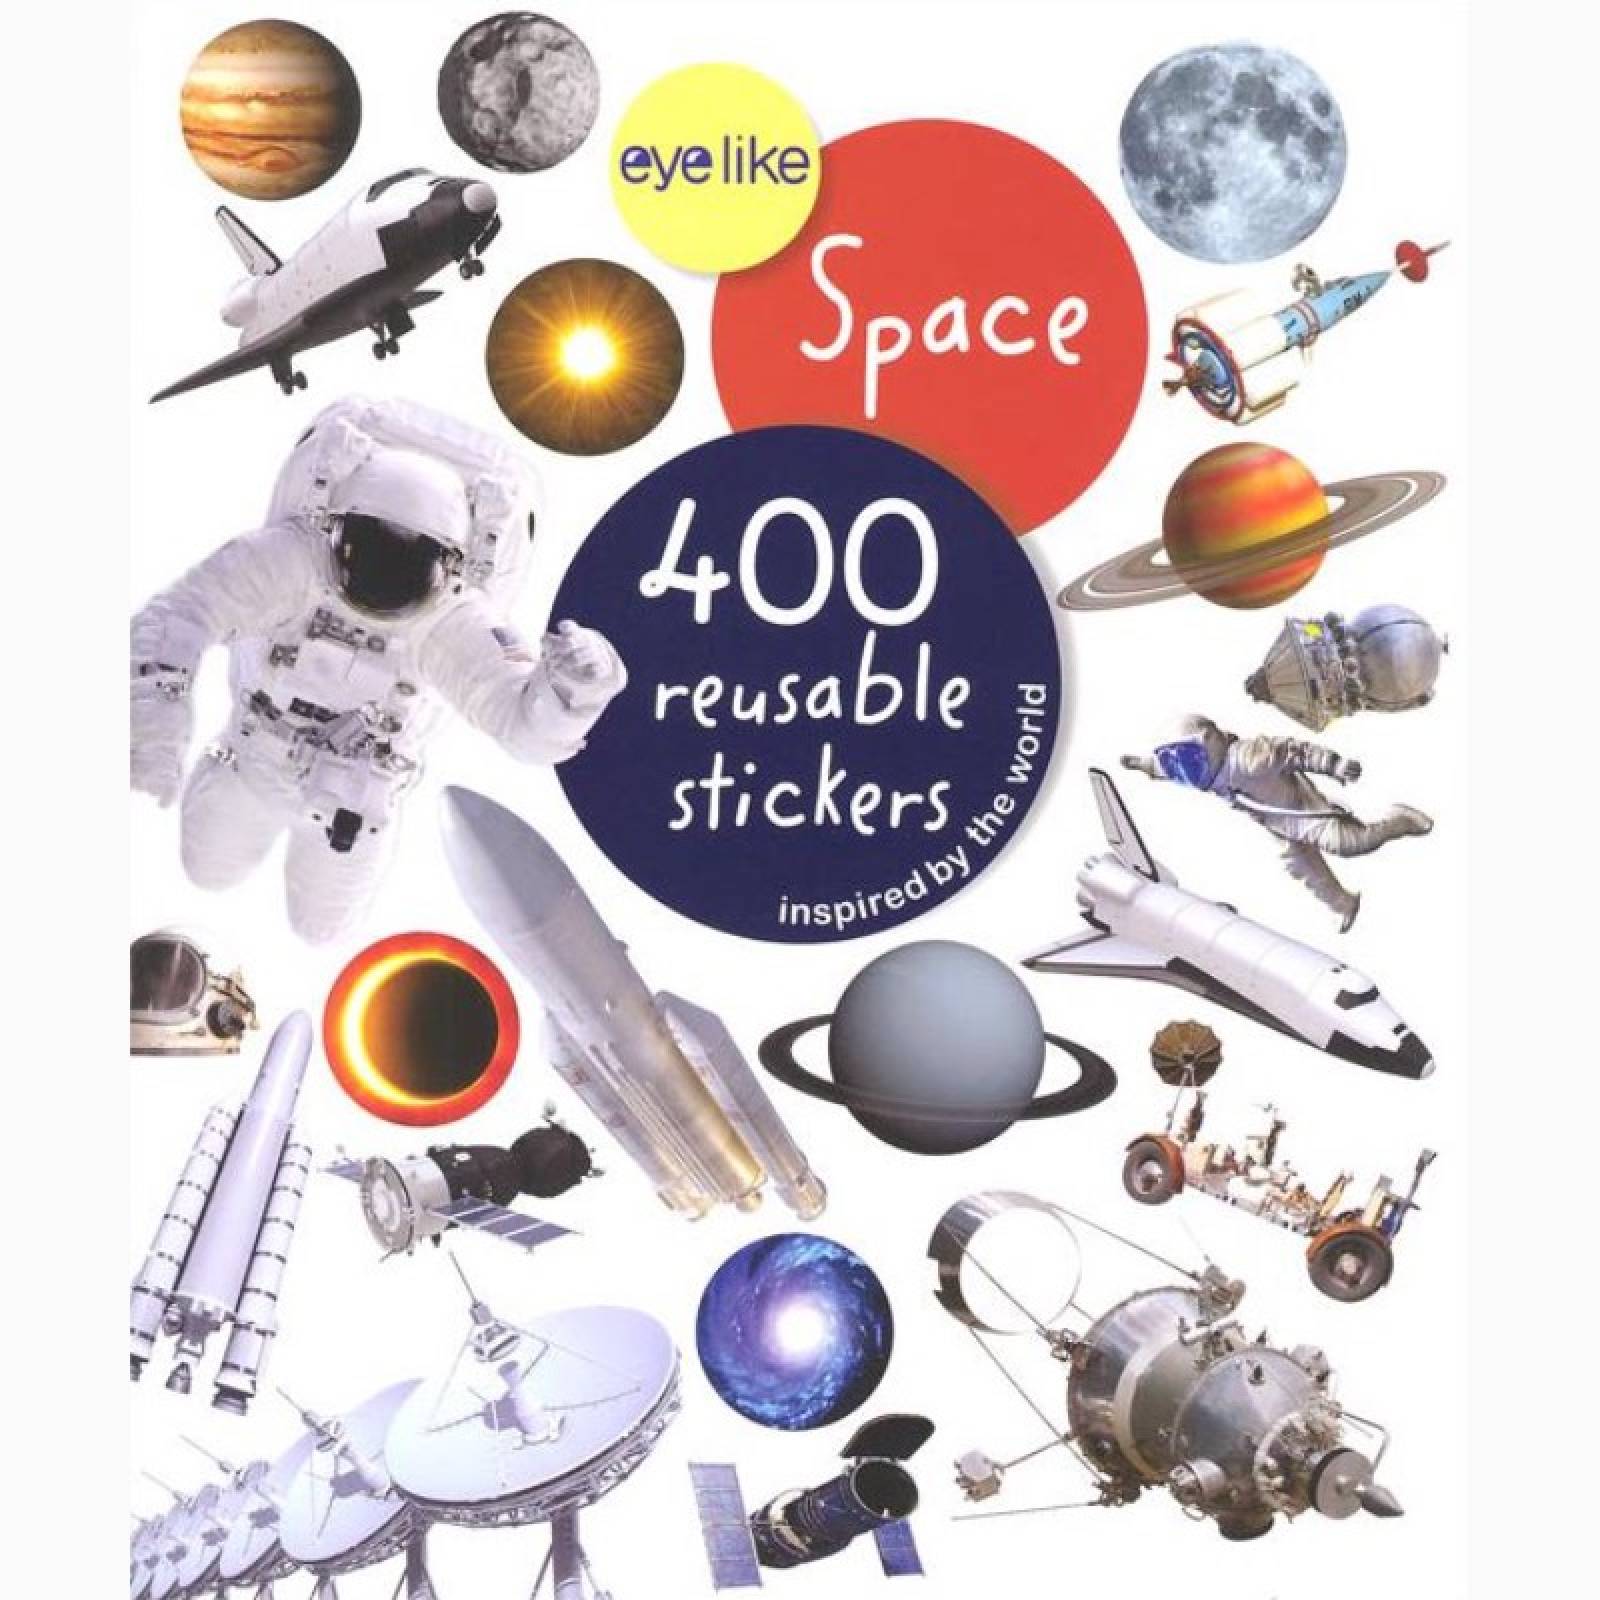 Eyelike Space: 400 Reusable Stickers thumbnails